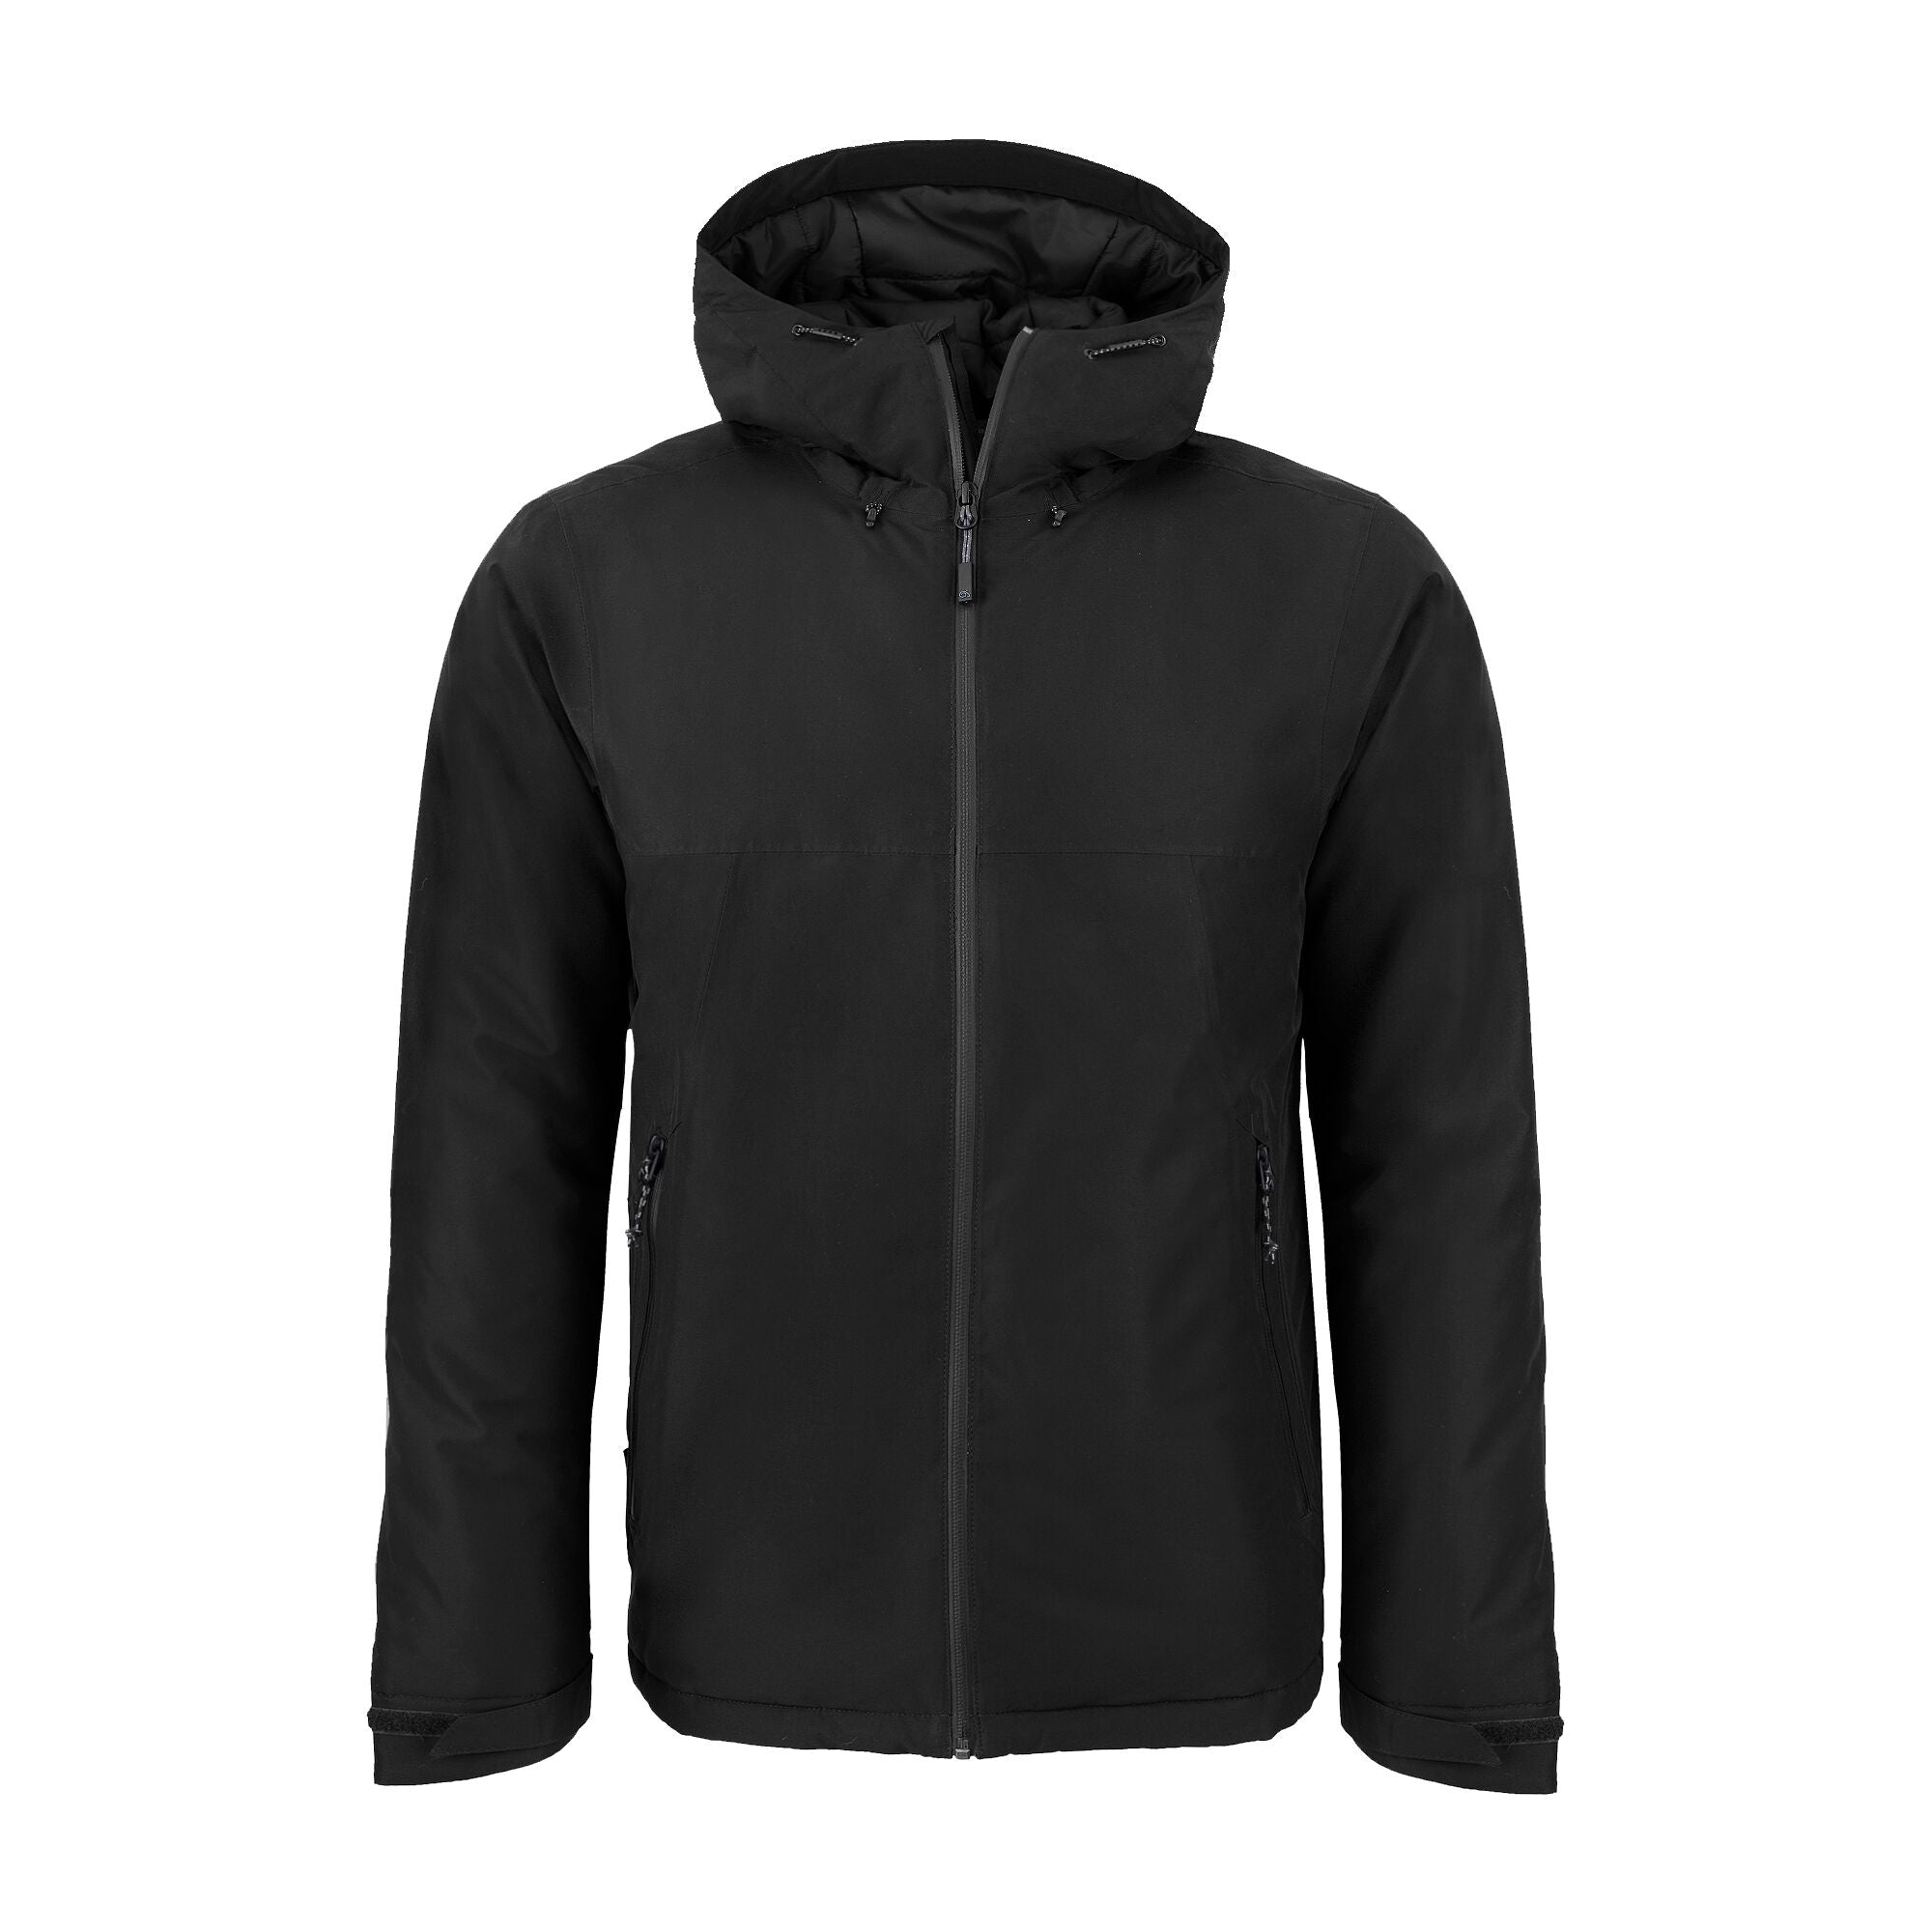 Craghopper Expert Thermic Insulated Jacket | Amenity Choice